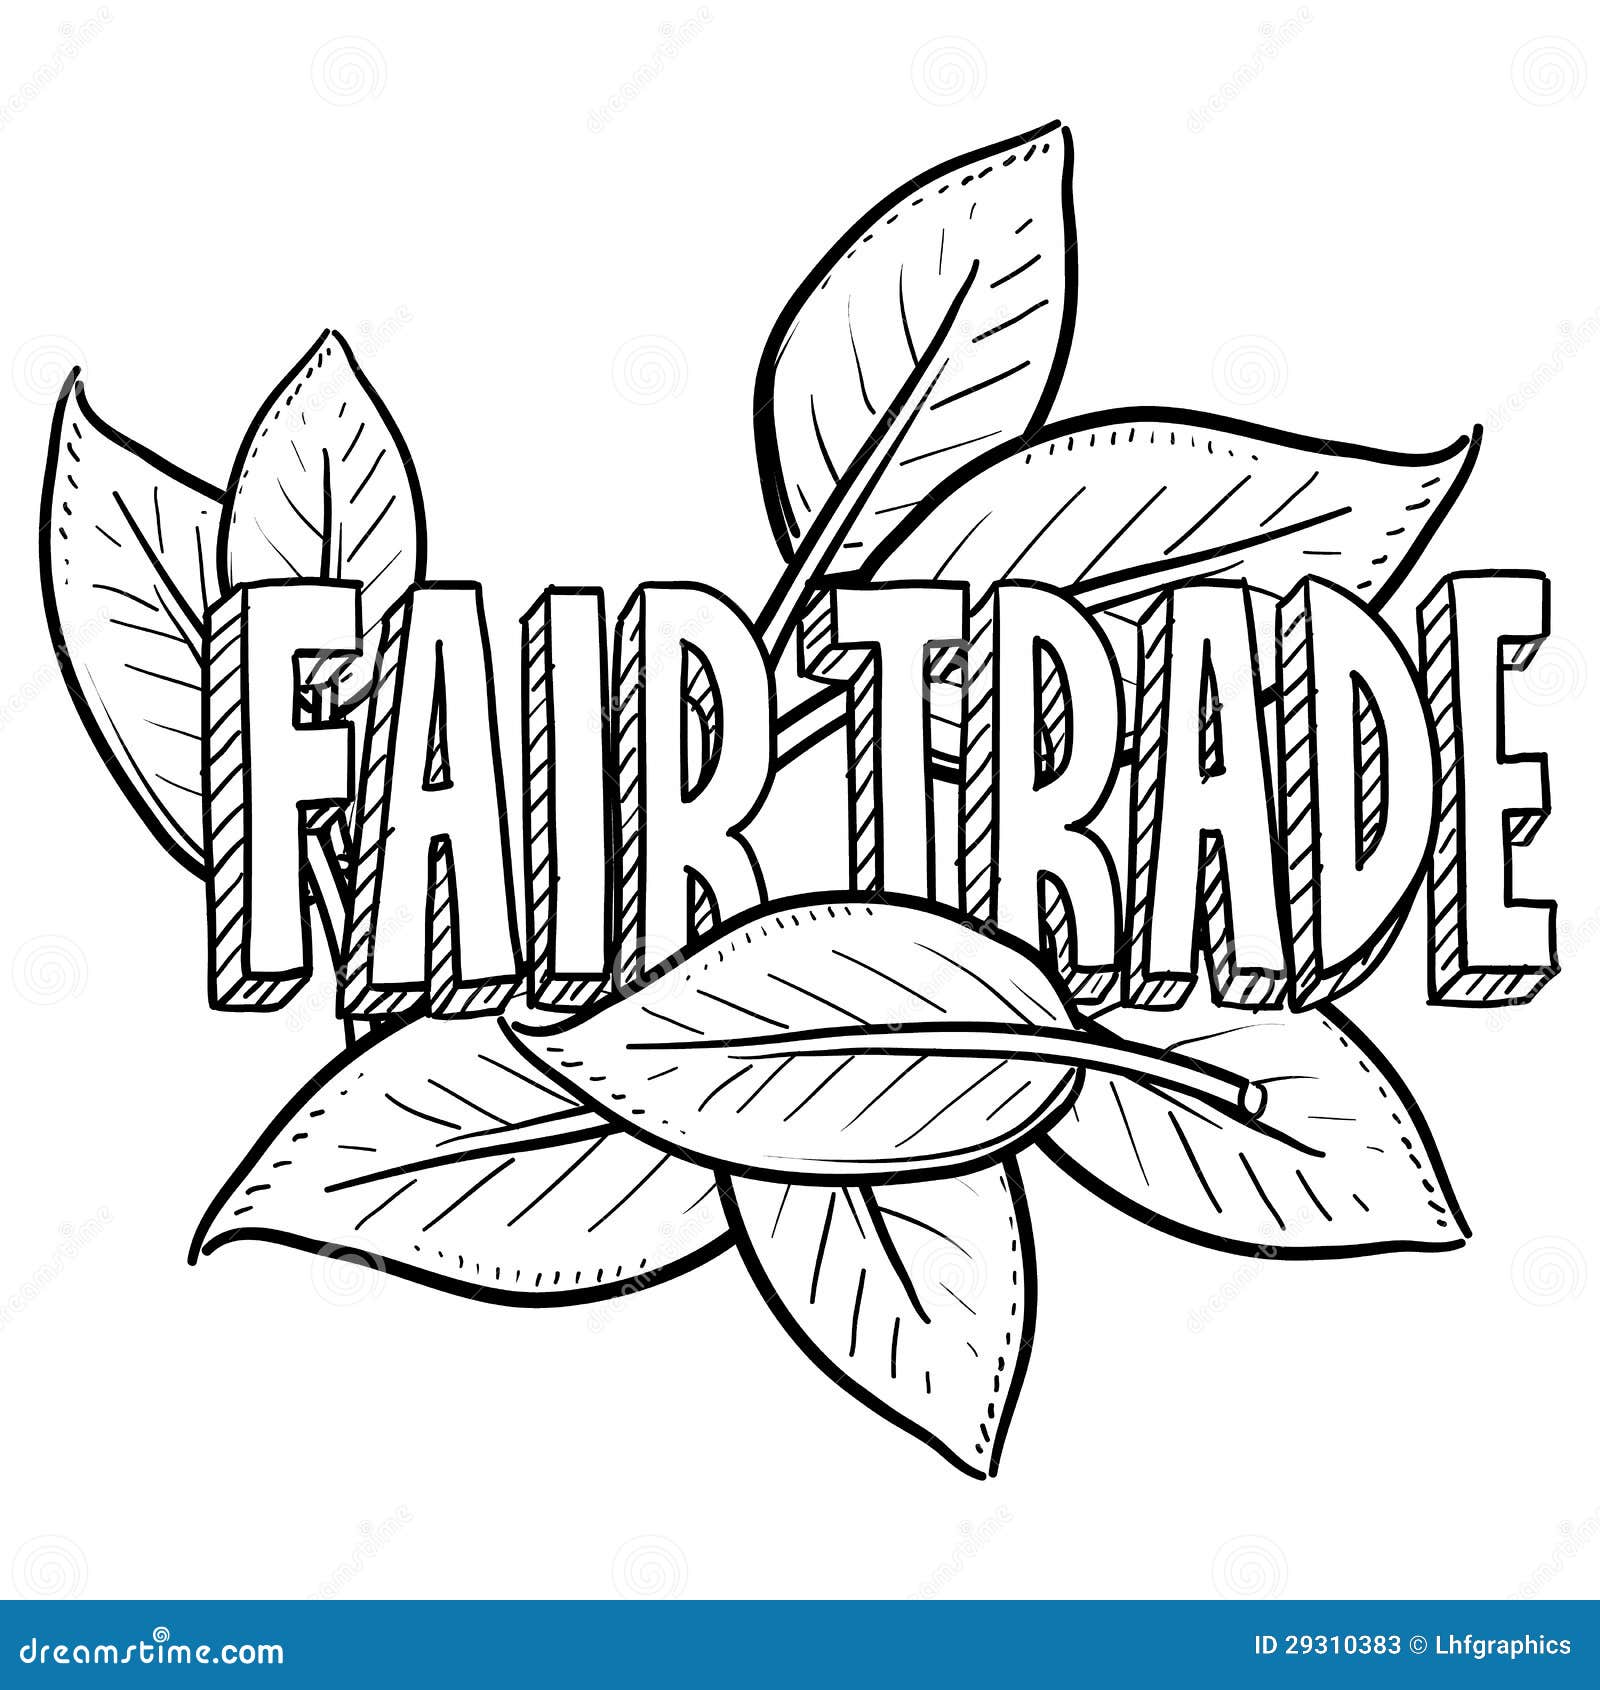 Fair trade food sketch Doodle style fair trade food illustration in vector  format includes text and leaves  CanStock